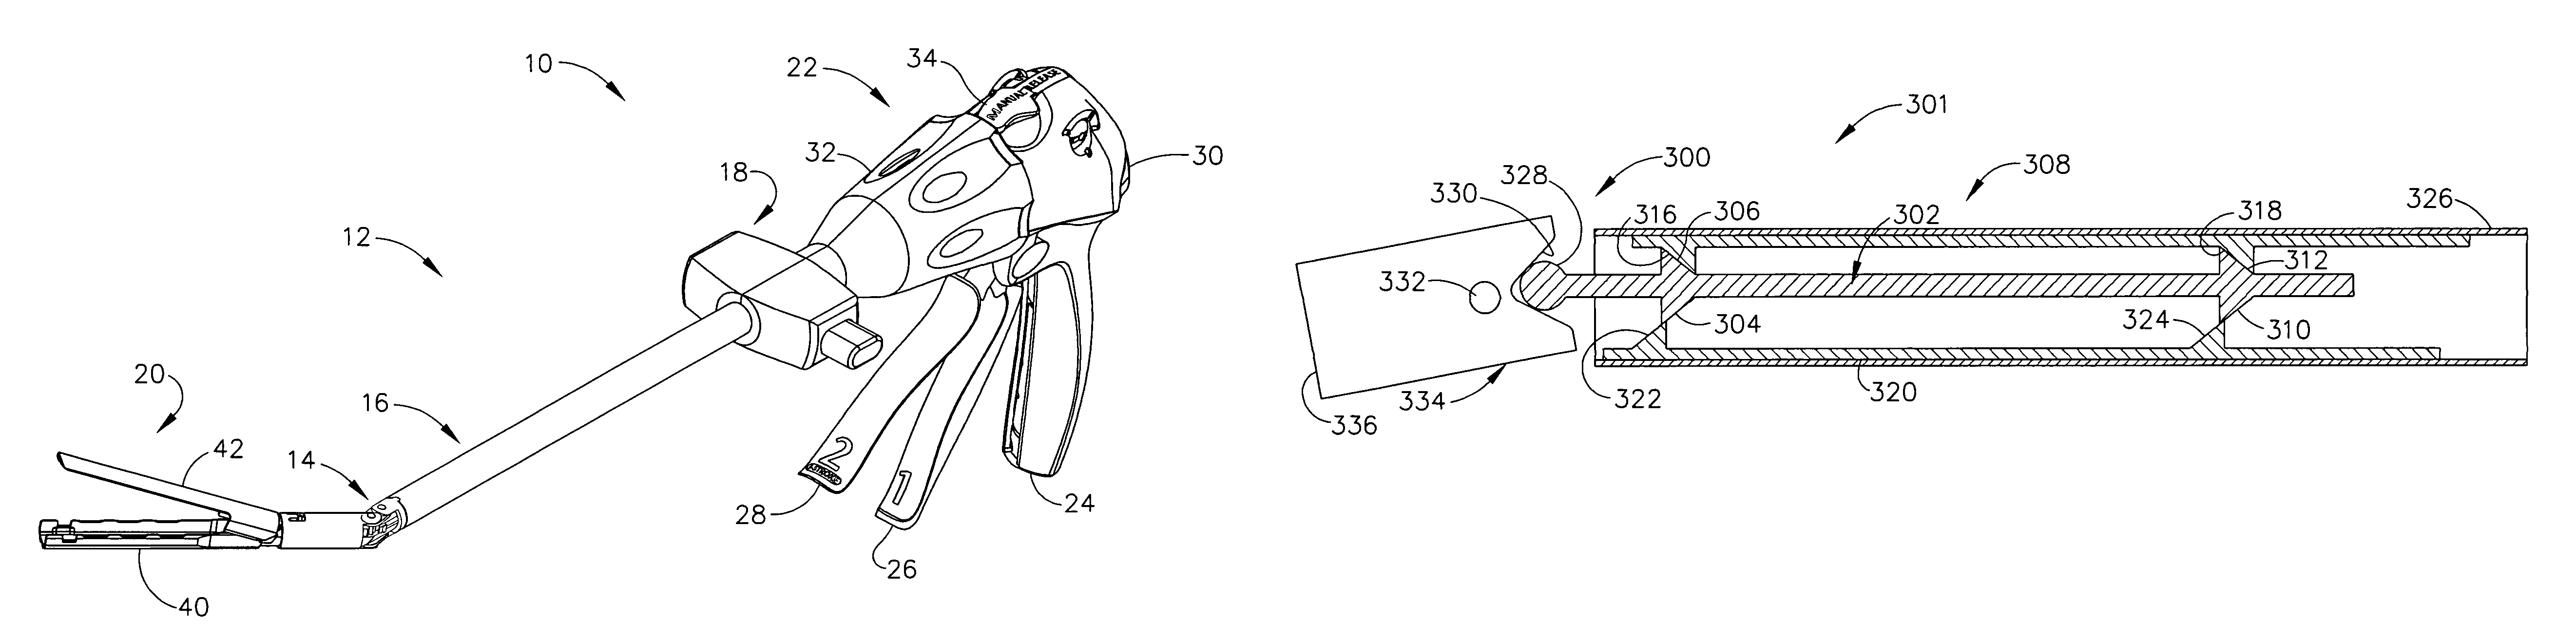 Surgical instrument with laterally moved shaft actuator coupled to pivoting articulation joint